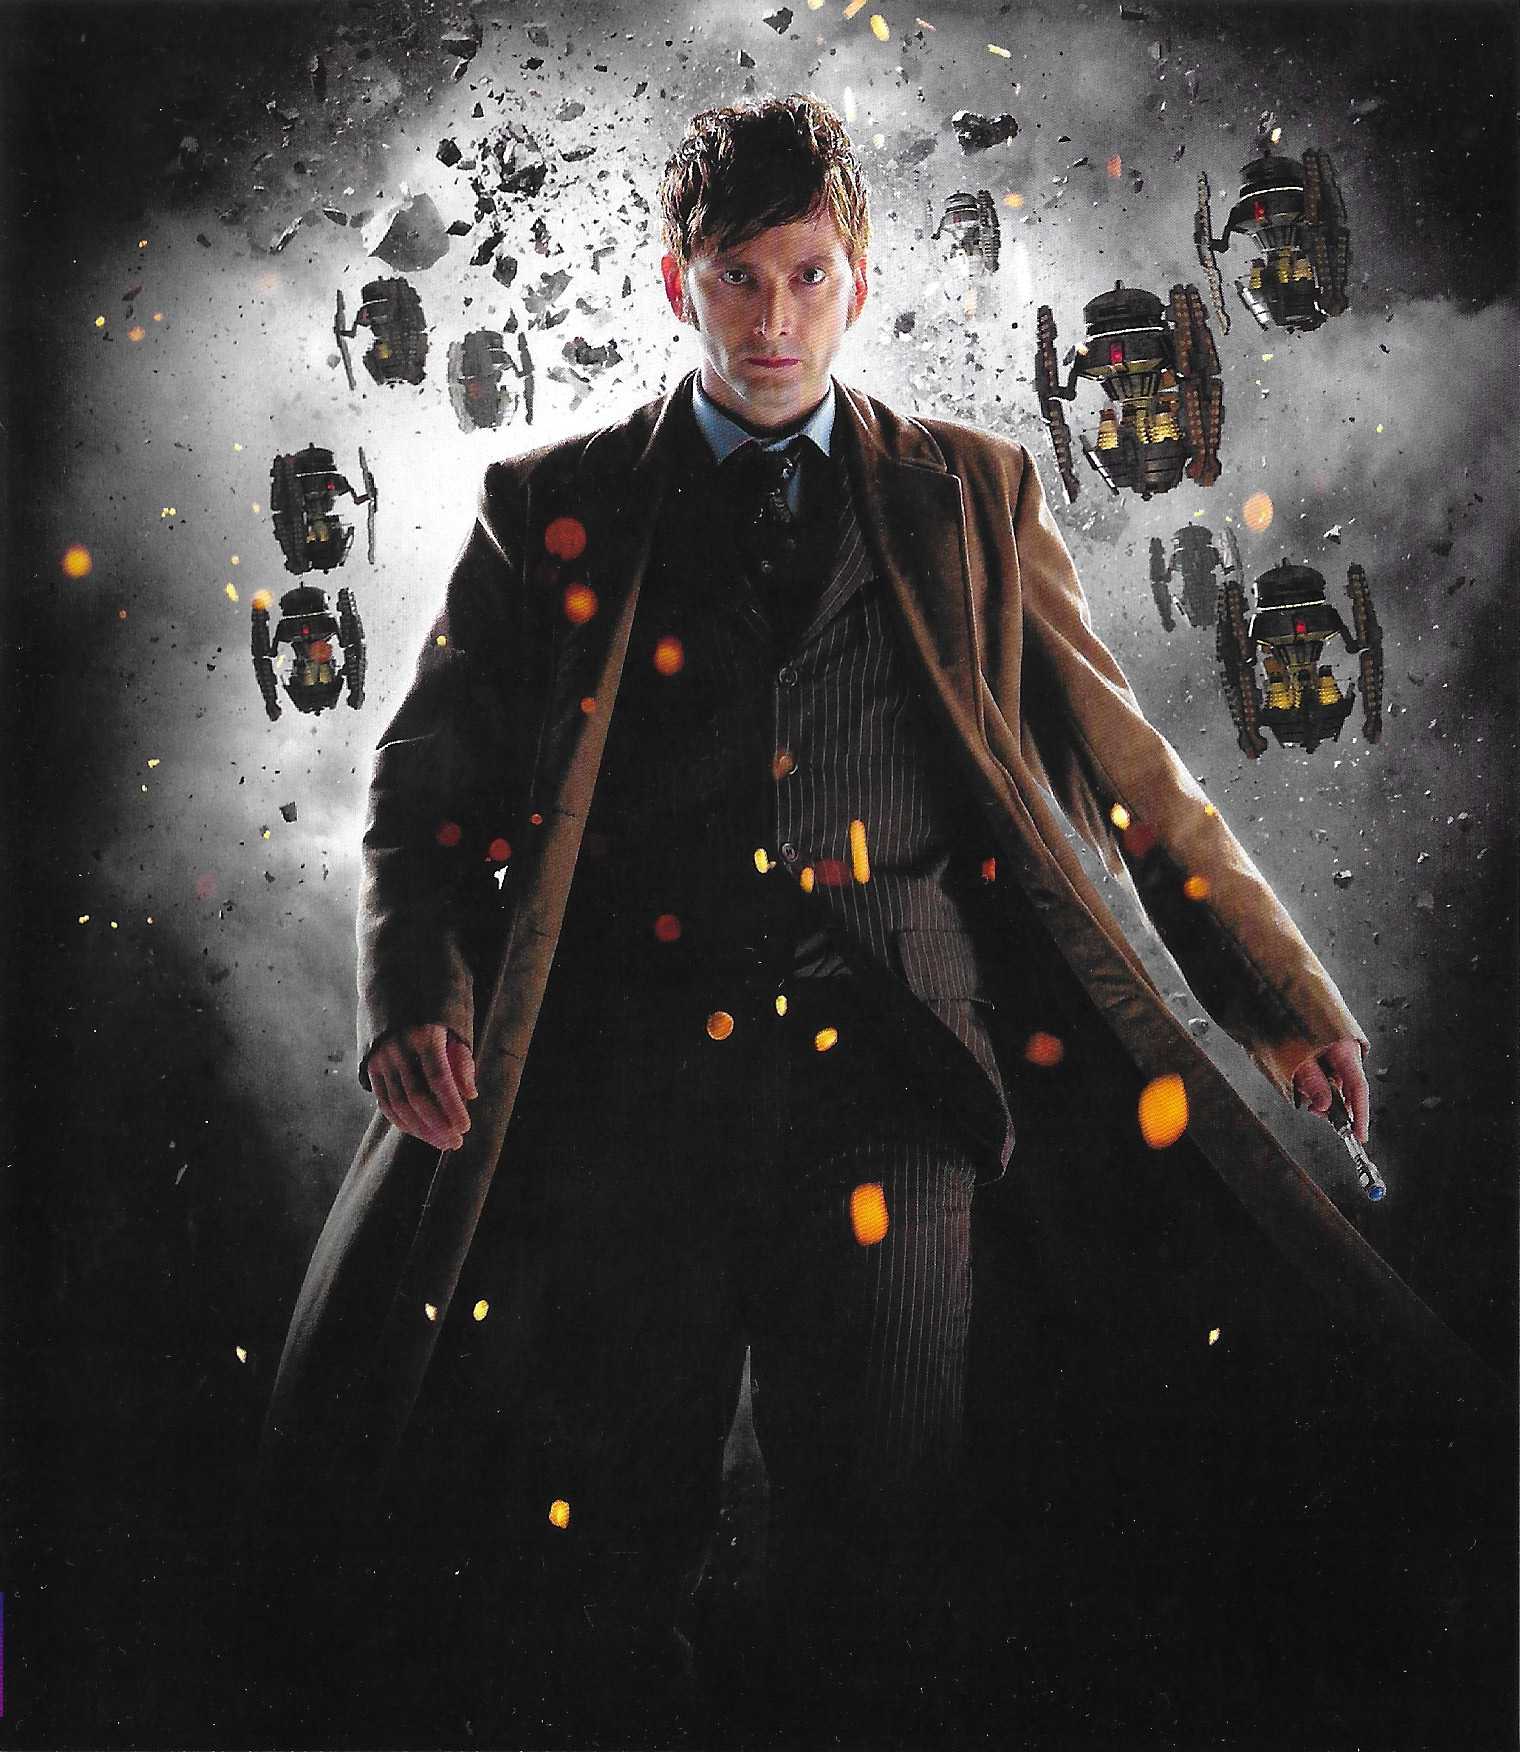 Picture of BBCBD 0271 02 Doctor Who - The day of the Doctor by artist Steven Moffat from the BBC records and Tapes library